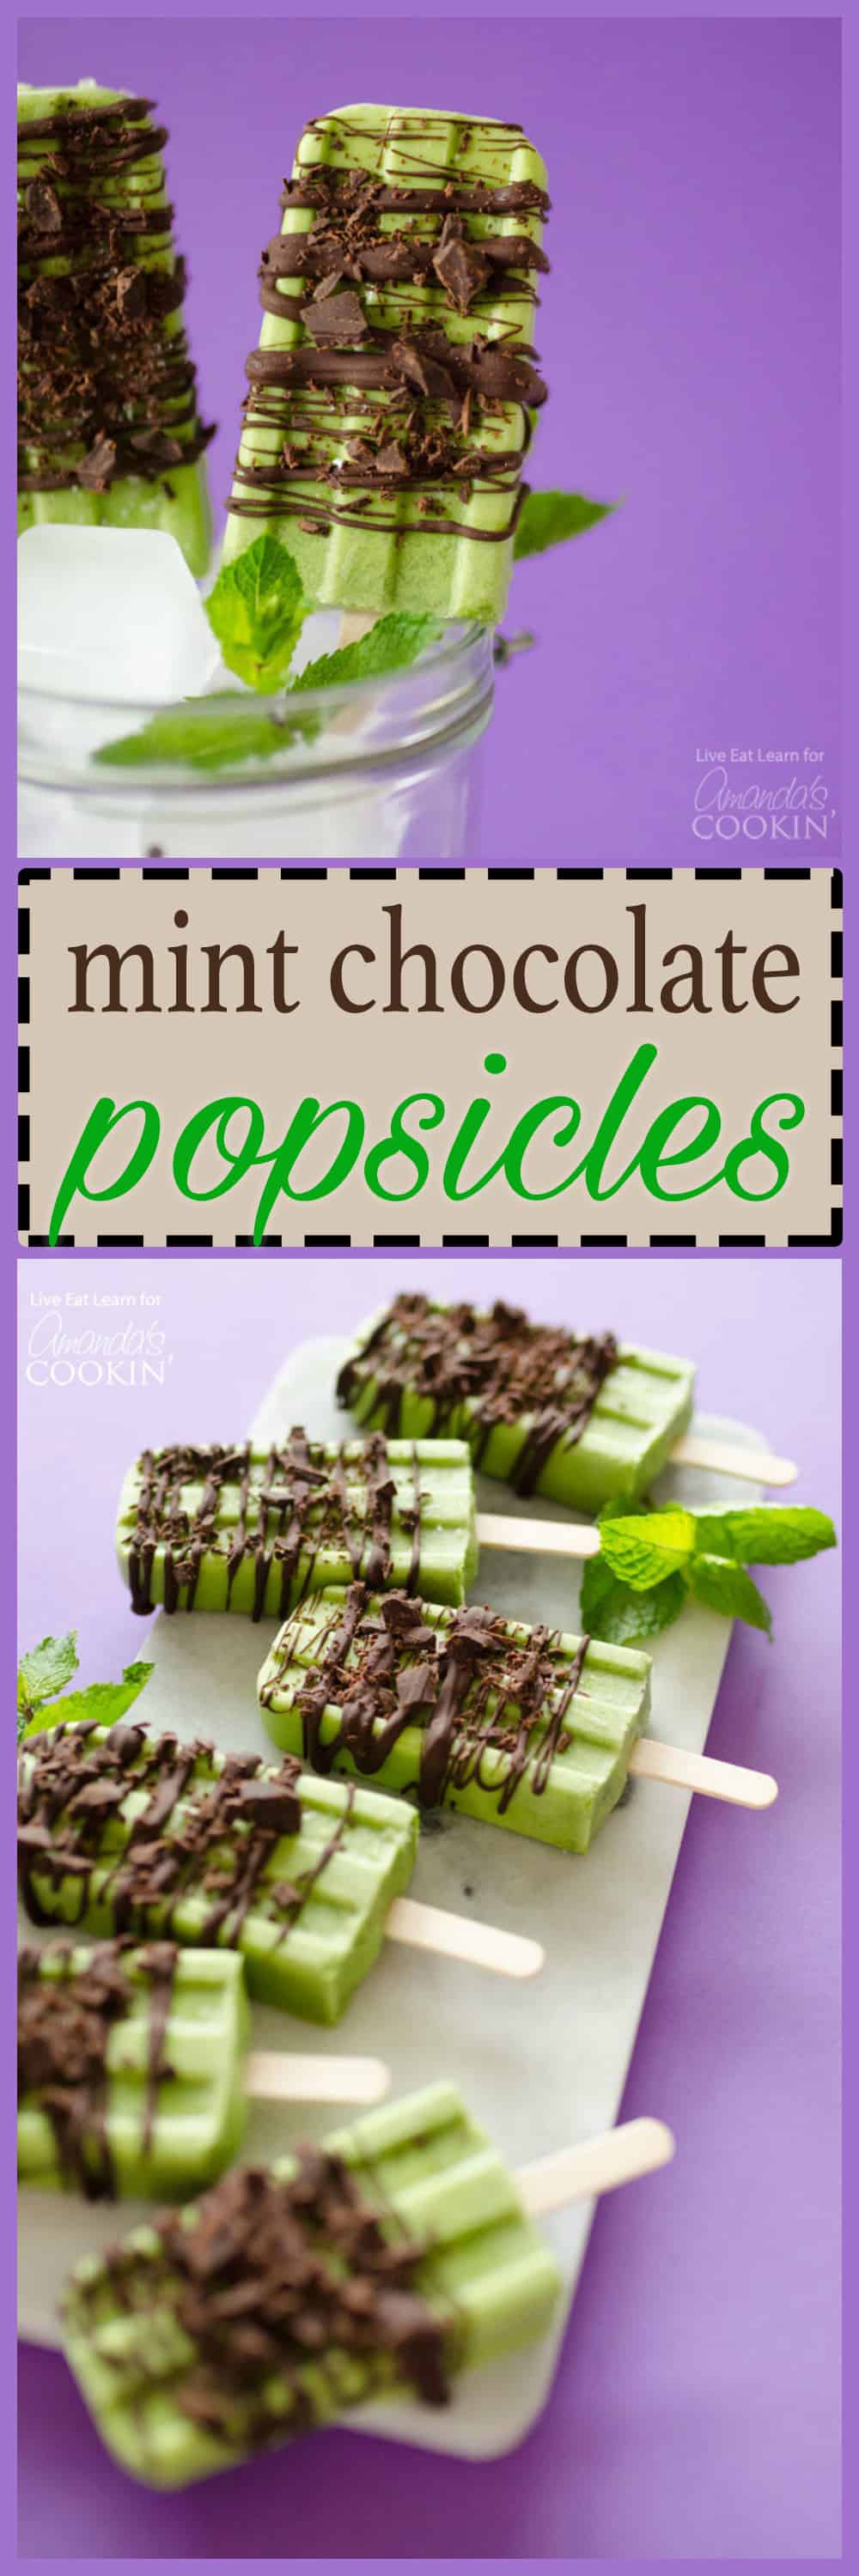 pinterest image of green popsicles with text